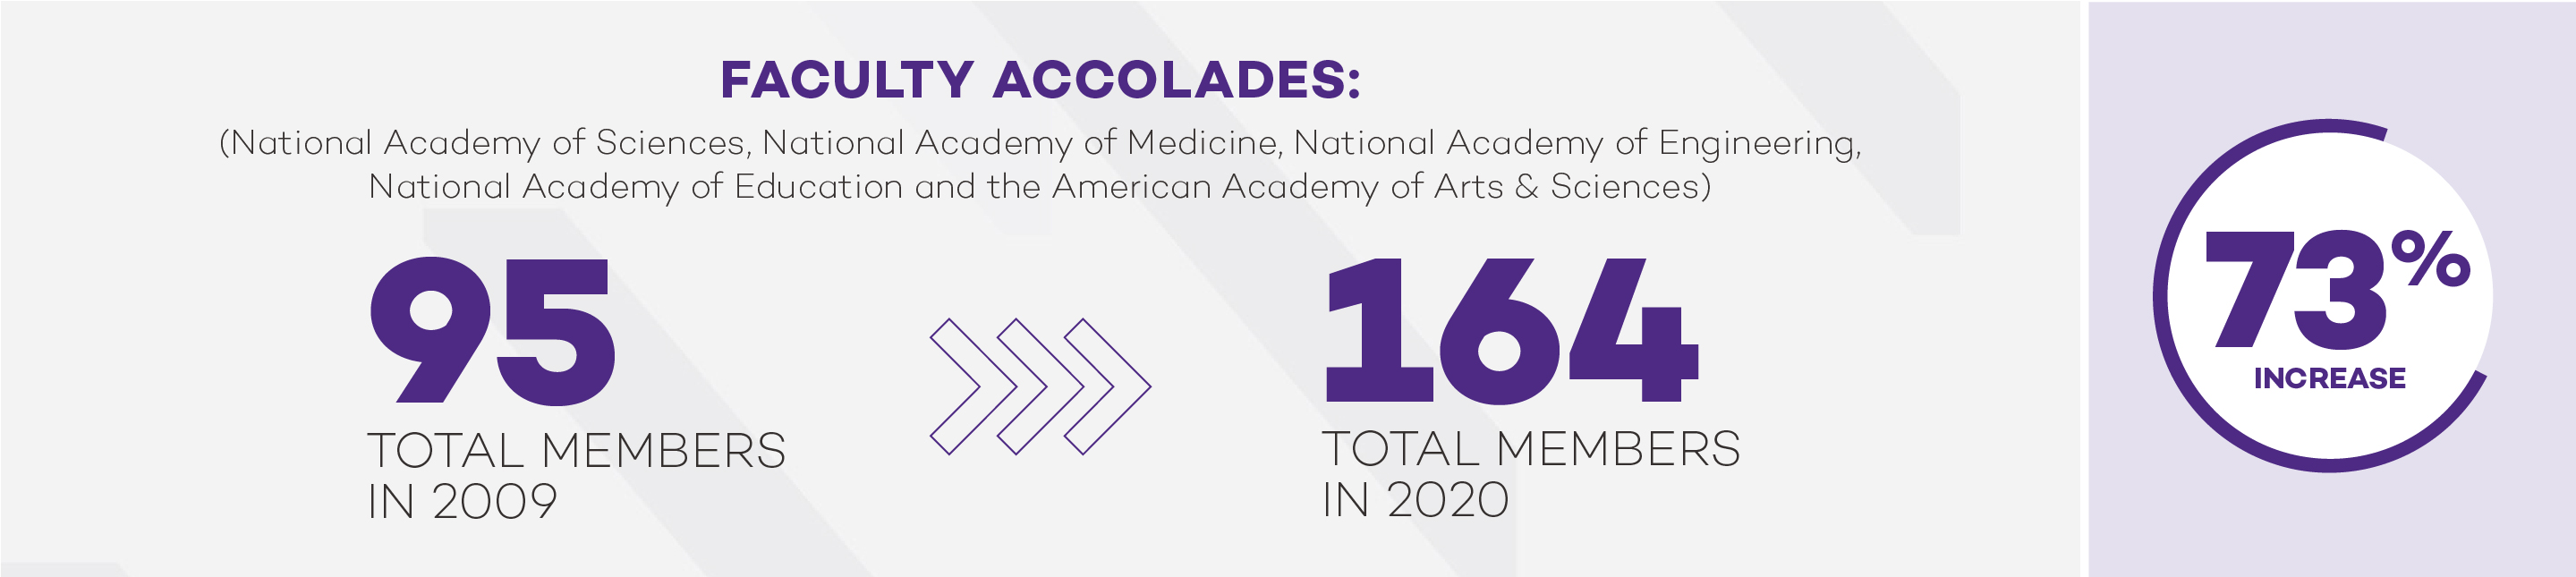 Faculty accolades: 95 total members (National Academy of Sciences, National Academy of Medicine, National Academy of Engineering, National Academy of Education and the American Academy of Arts of Sciences) in 2009 >>> 164 total members in 2020 - 73% increase